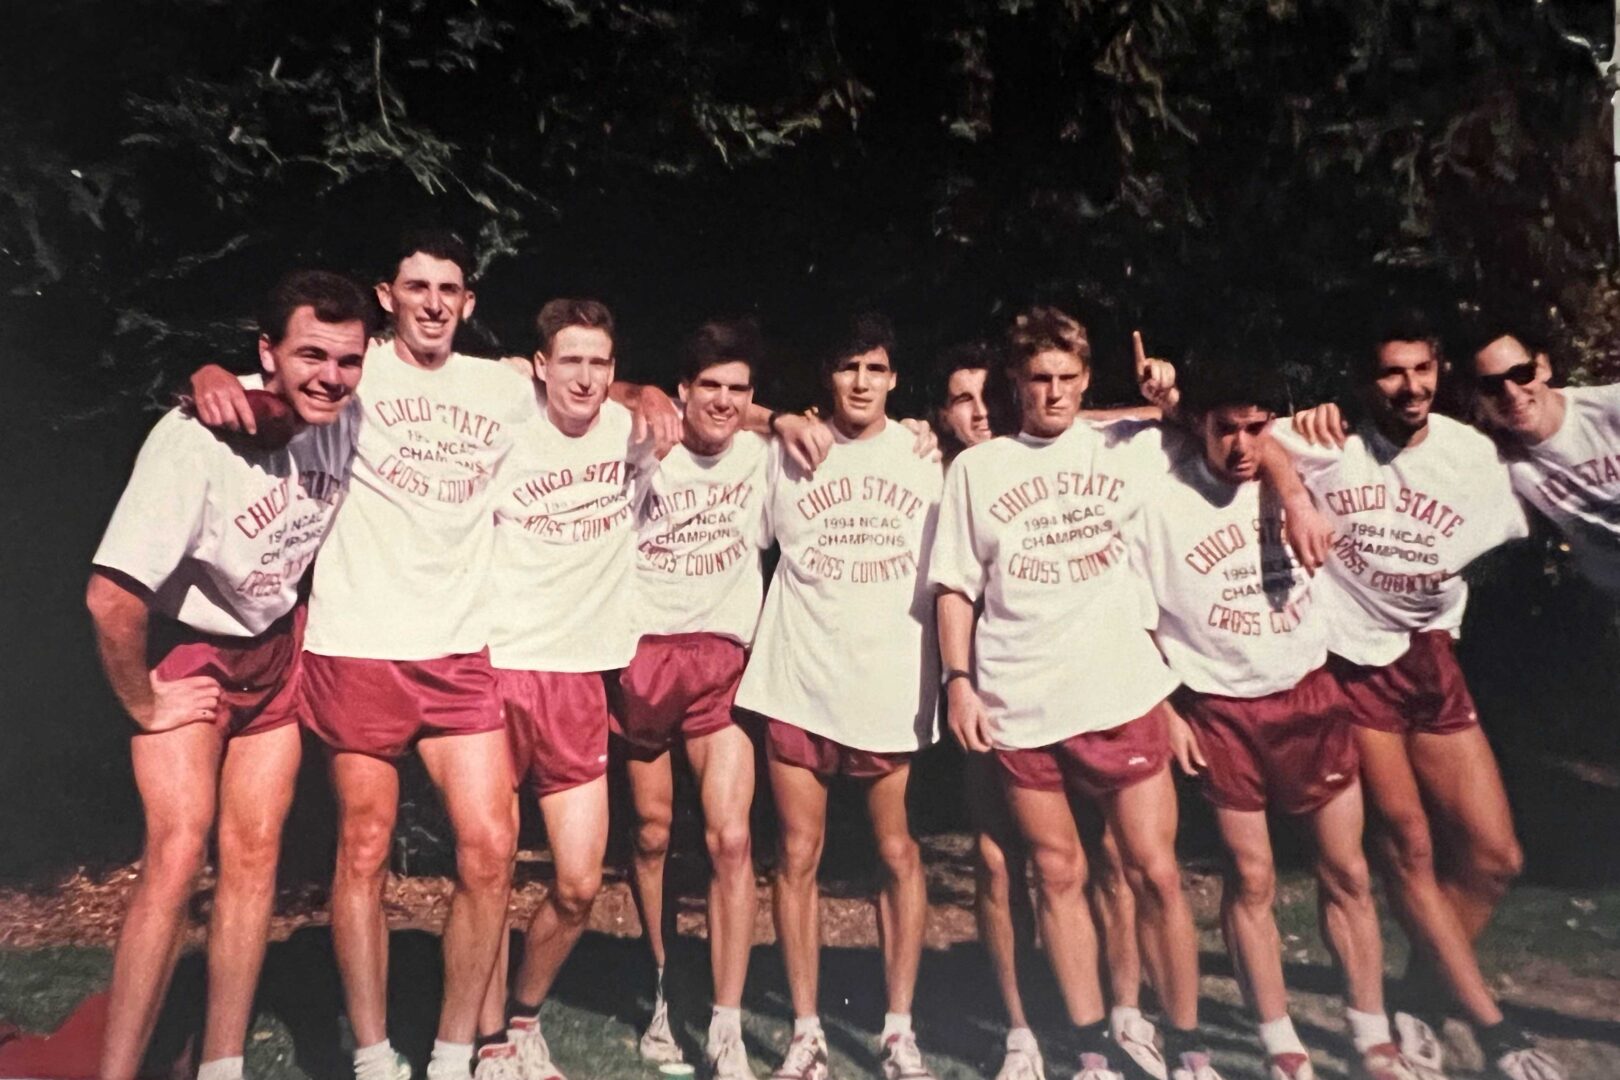 The 1994 Chico State men's cross country Northern California Athletic Conference championship team (from left to right): Kevin Selby, Noah Marcus, Todd Stevens, Sean Gettman, Alvaro Luna, Billy Rickets, Chris Myers, Erick Rickets, Gary Blanco, and assistant coach Gary Towne.